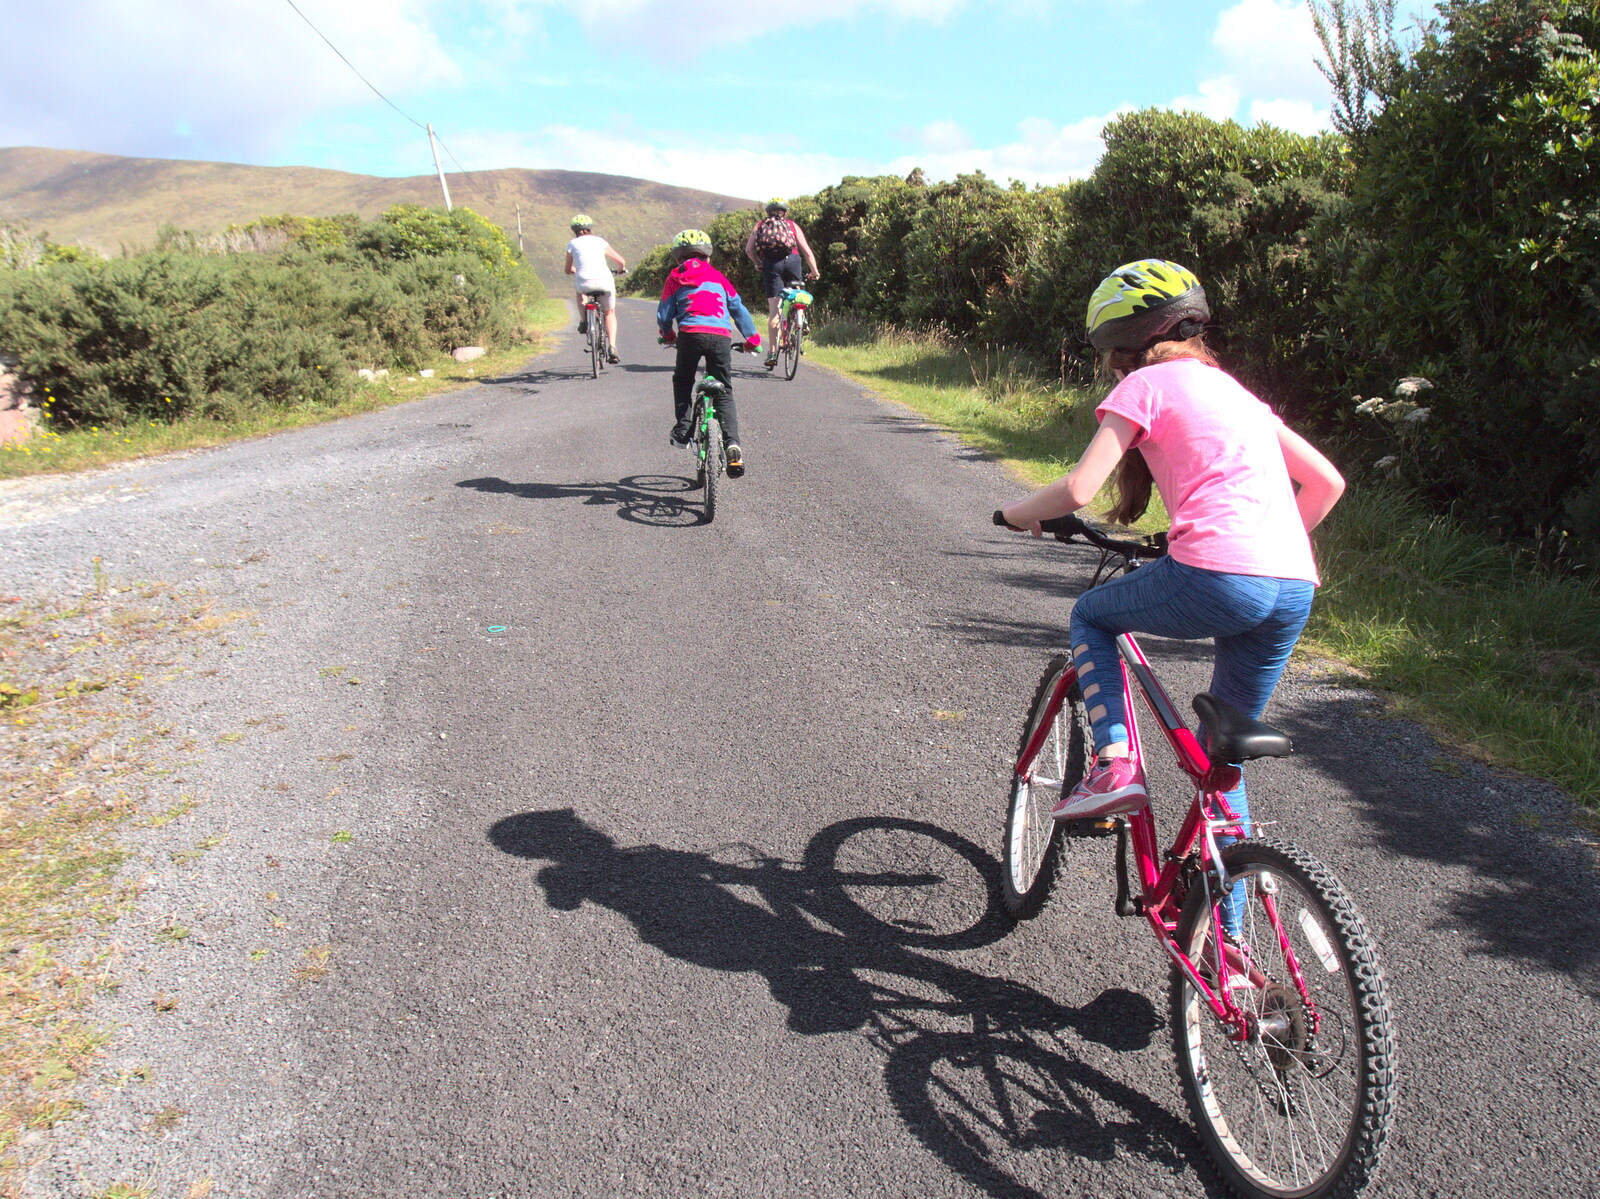 Riding up the only hill in the whole 16 miles from A Bike Ride to Mulranny, County Mayo, Ireland - 9th August 2017